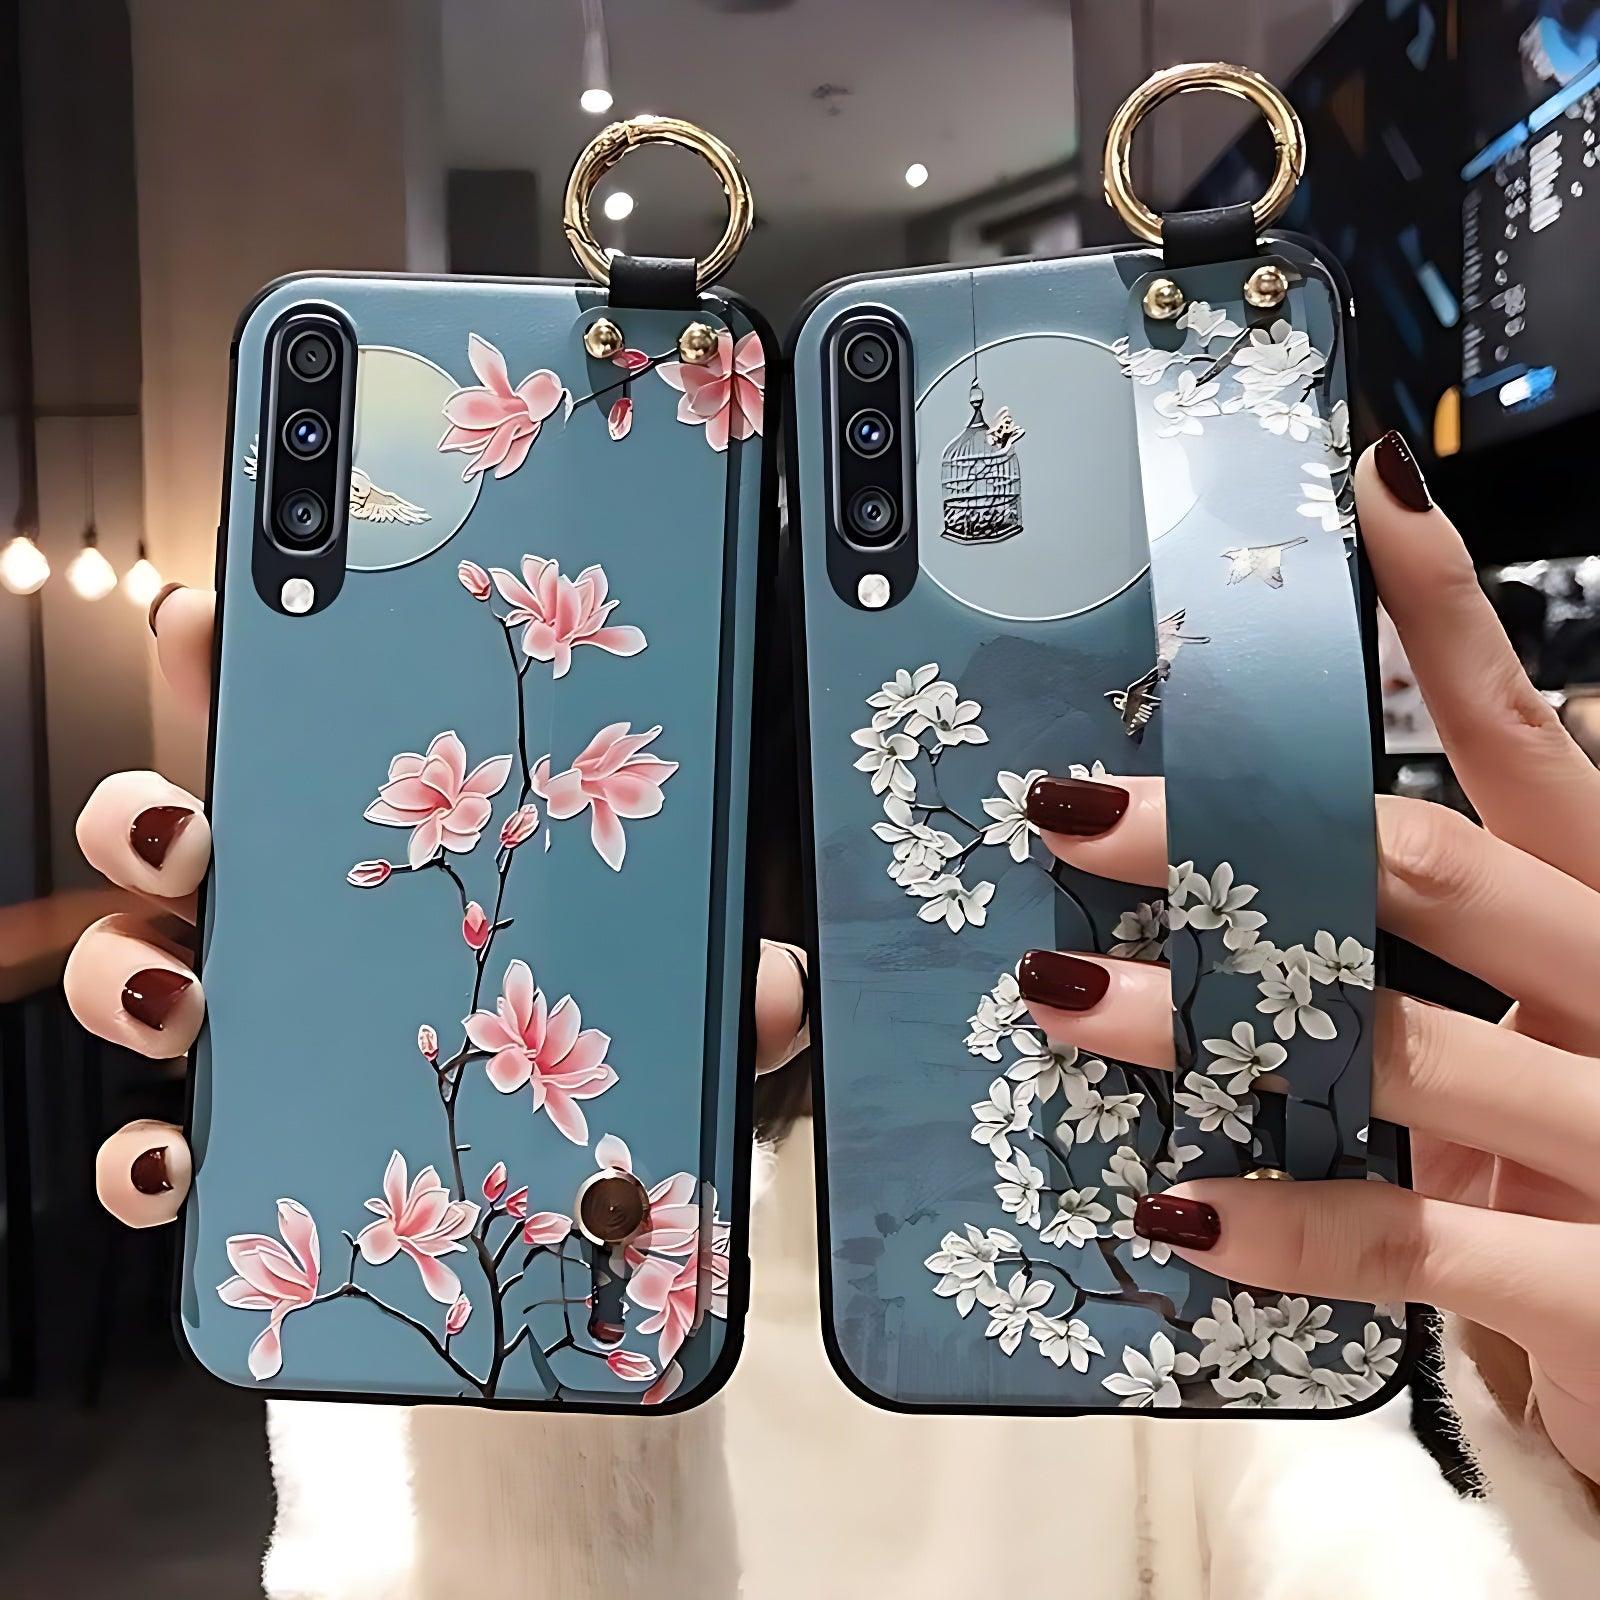 Galaxy S8 Cute Phone Cases - Touchy Style .